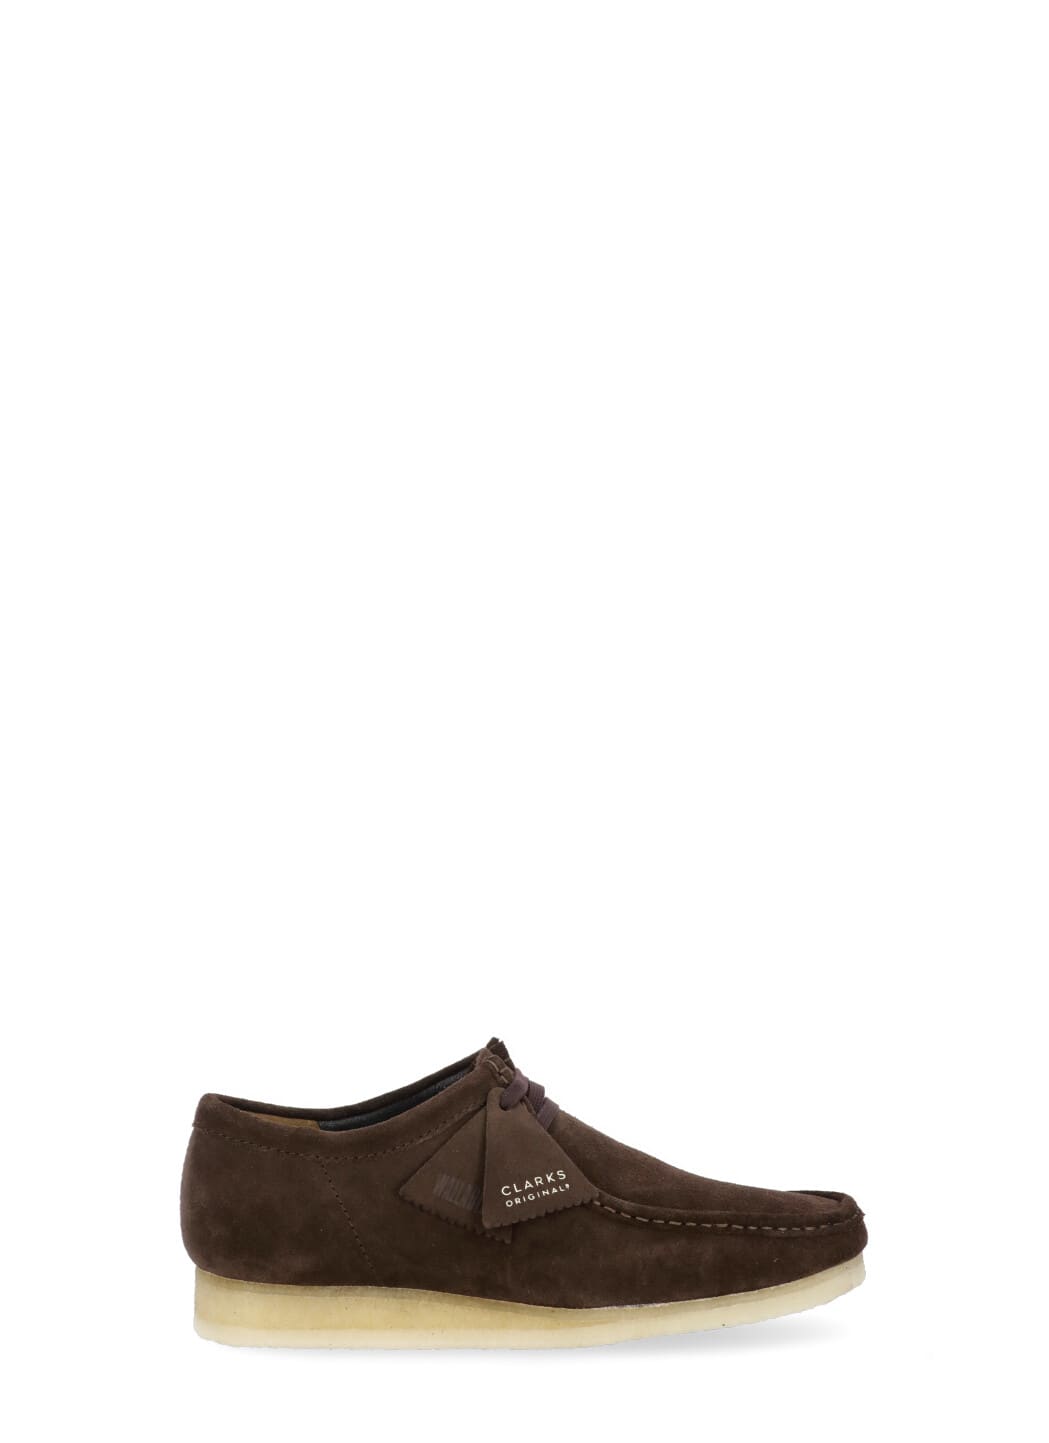 CLARKS SUEDE LEATHER SHOES